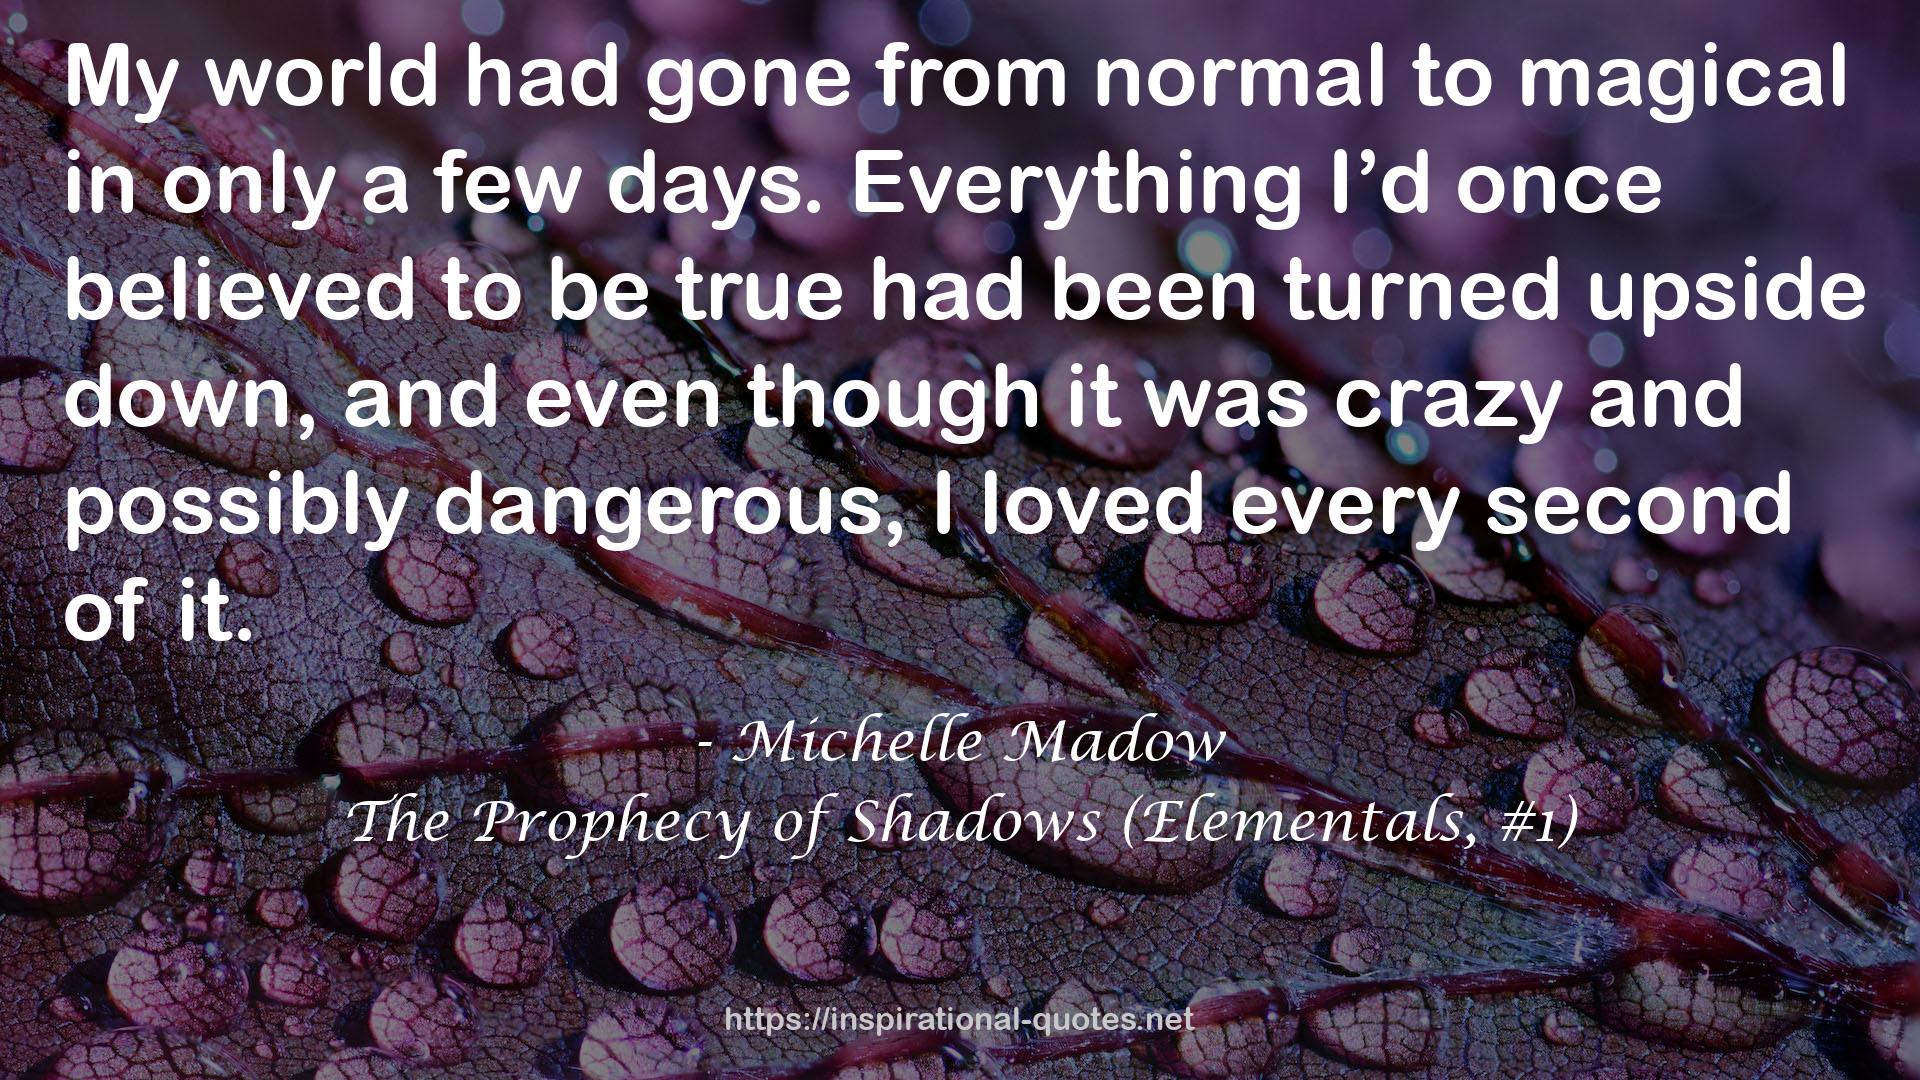 The Prophecy of Shadows (Elementals, #1) QUOTES